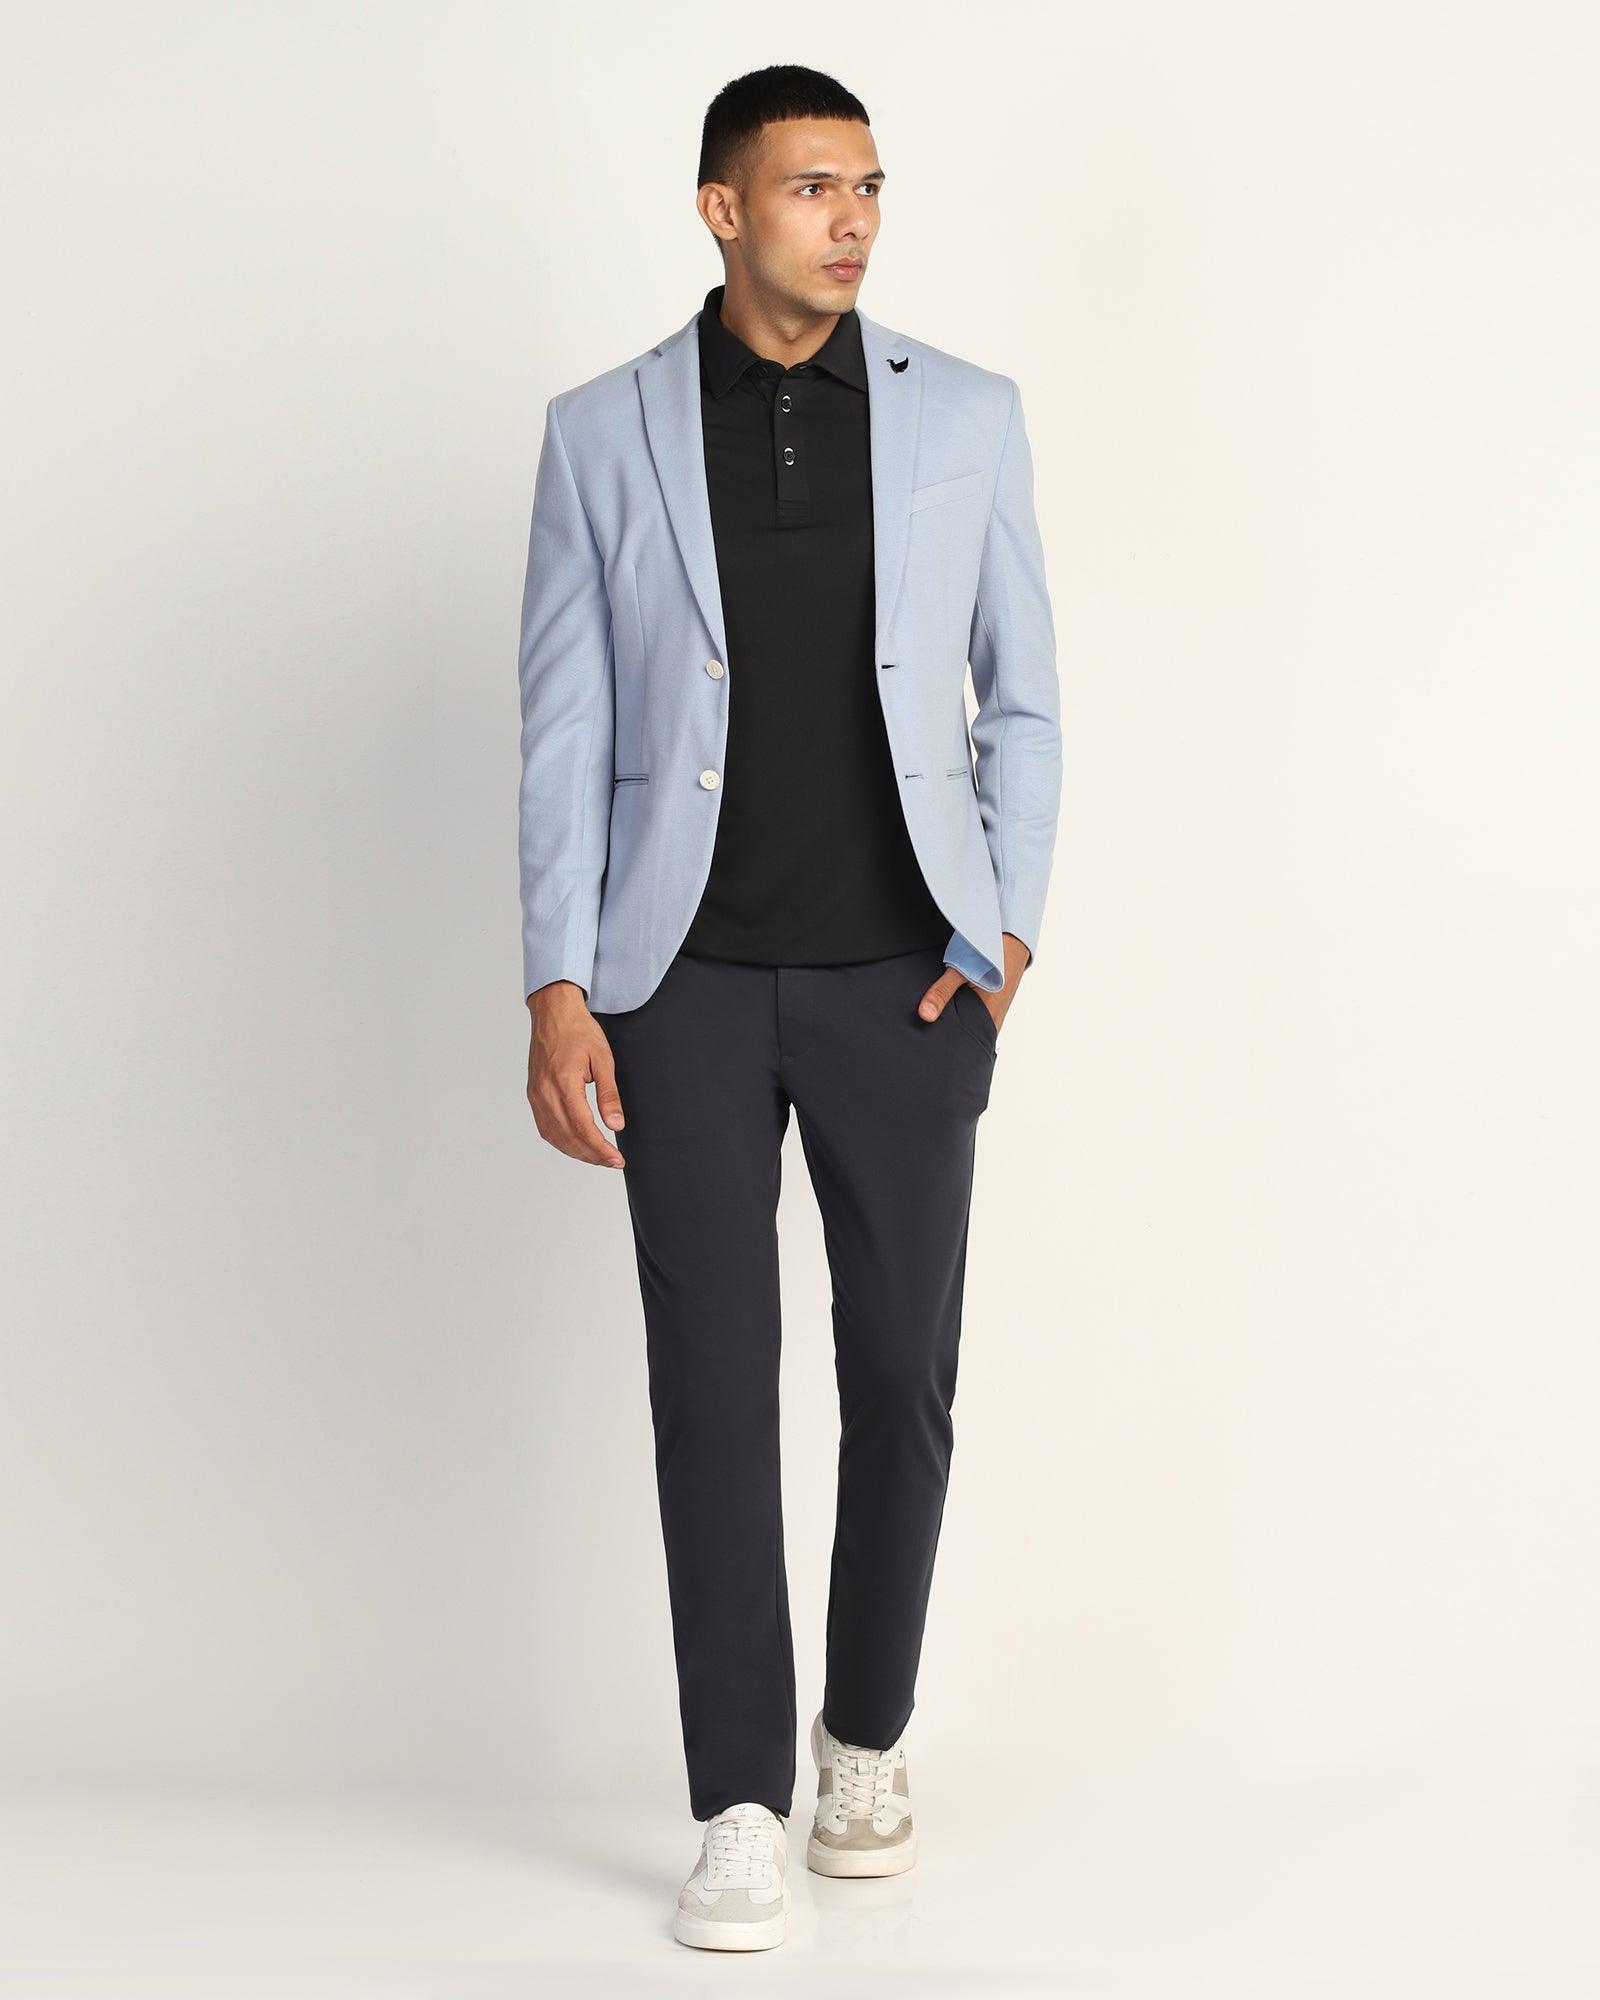 10 Foolproof Blazer And Trouser Separates Combinations | FashionBeans |  Blazer outfits men, Blue blazer men, Blue blazer outfit men